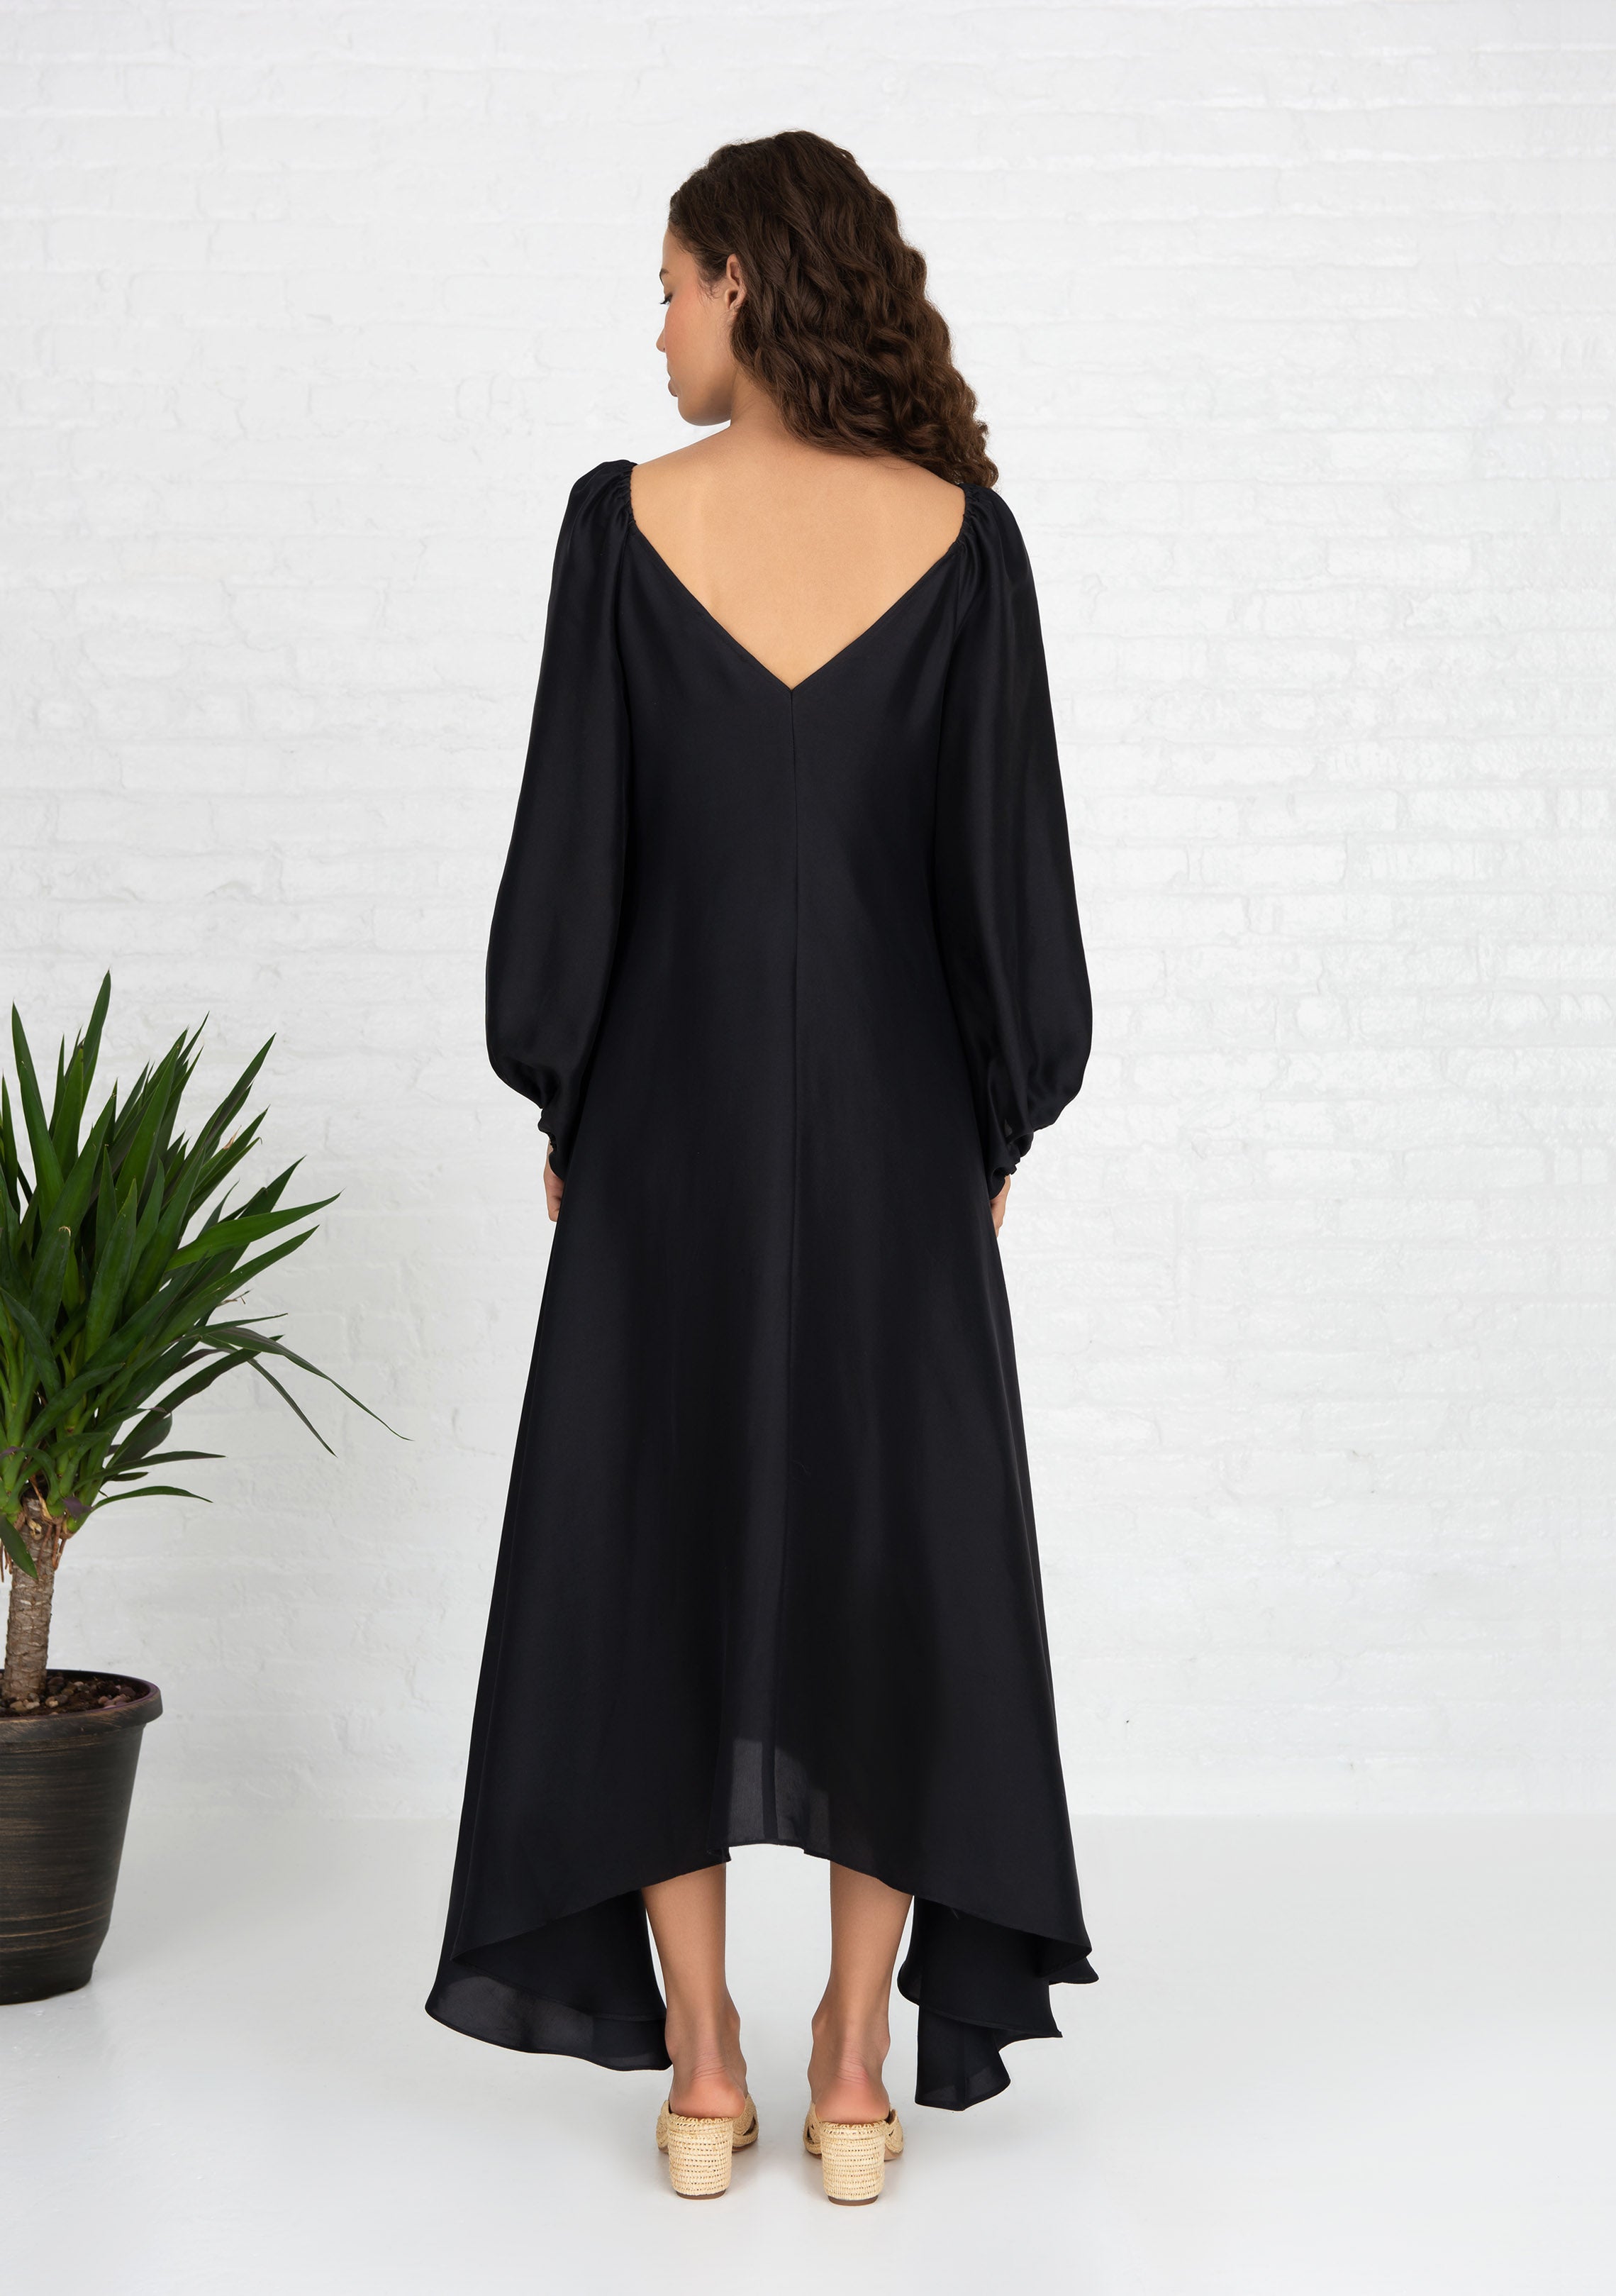 v neck dress with sleeves